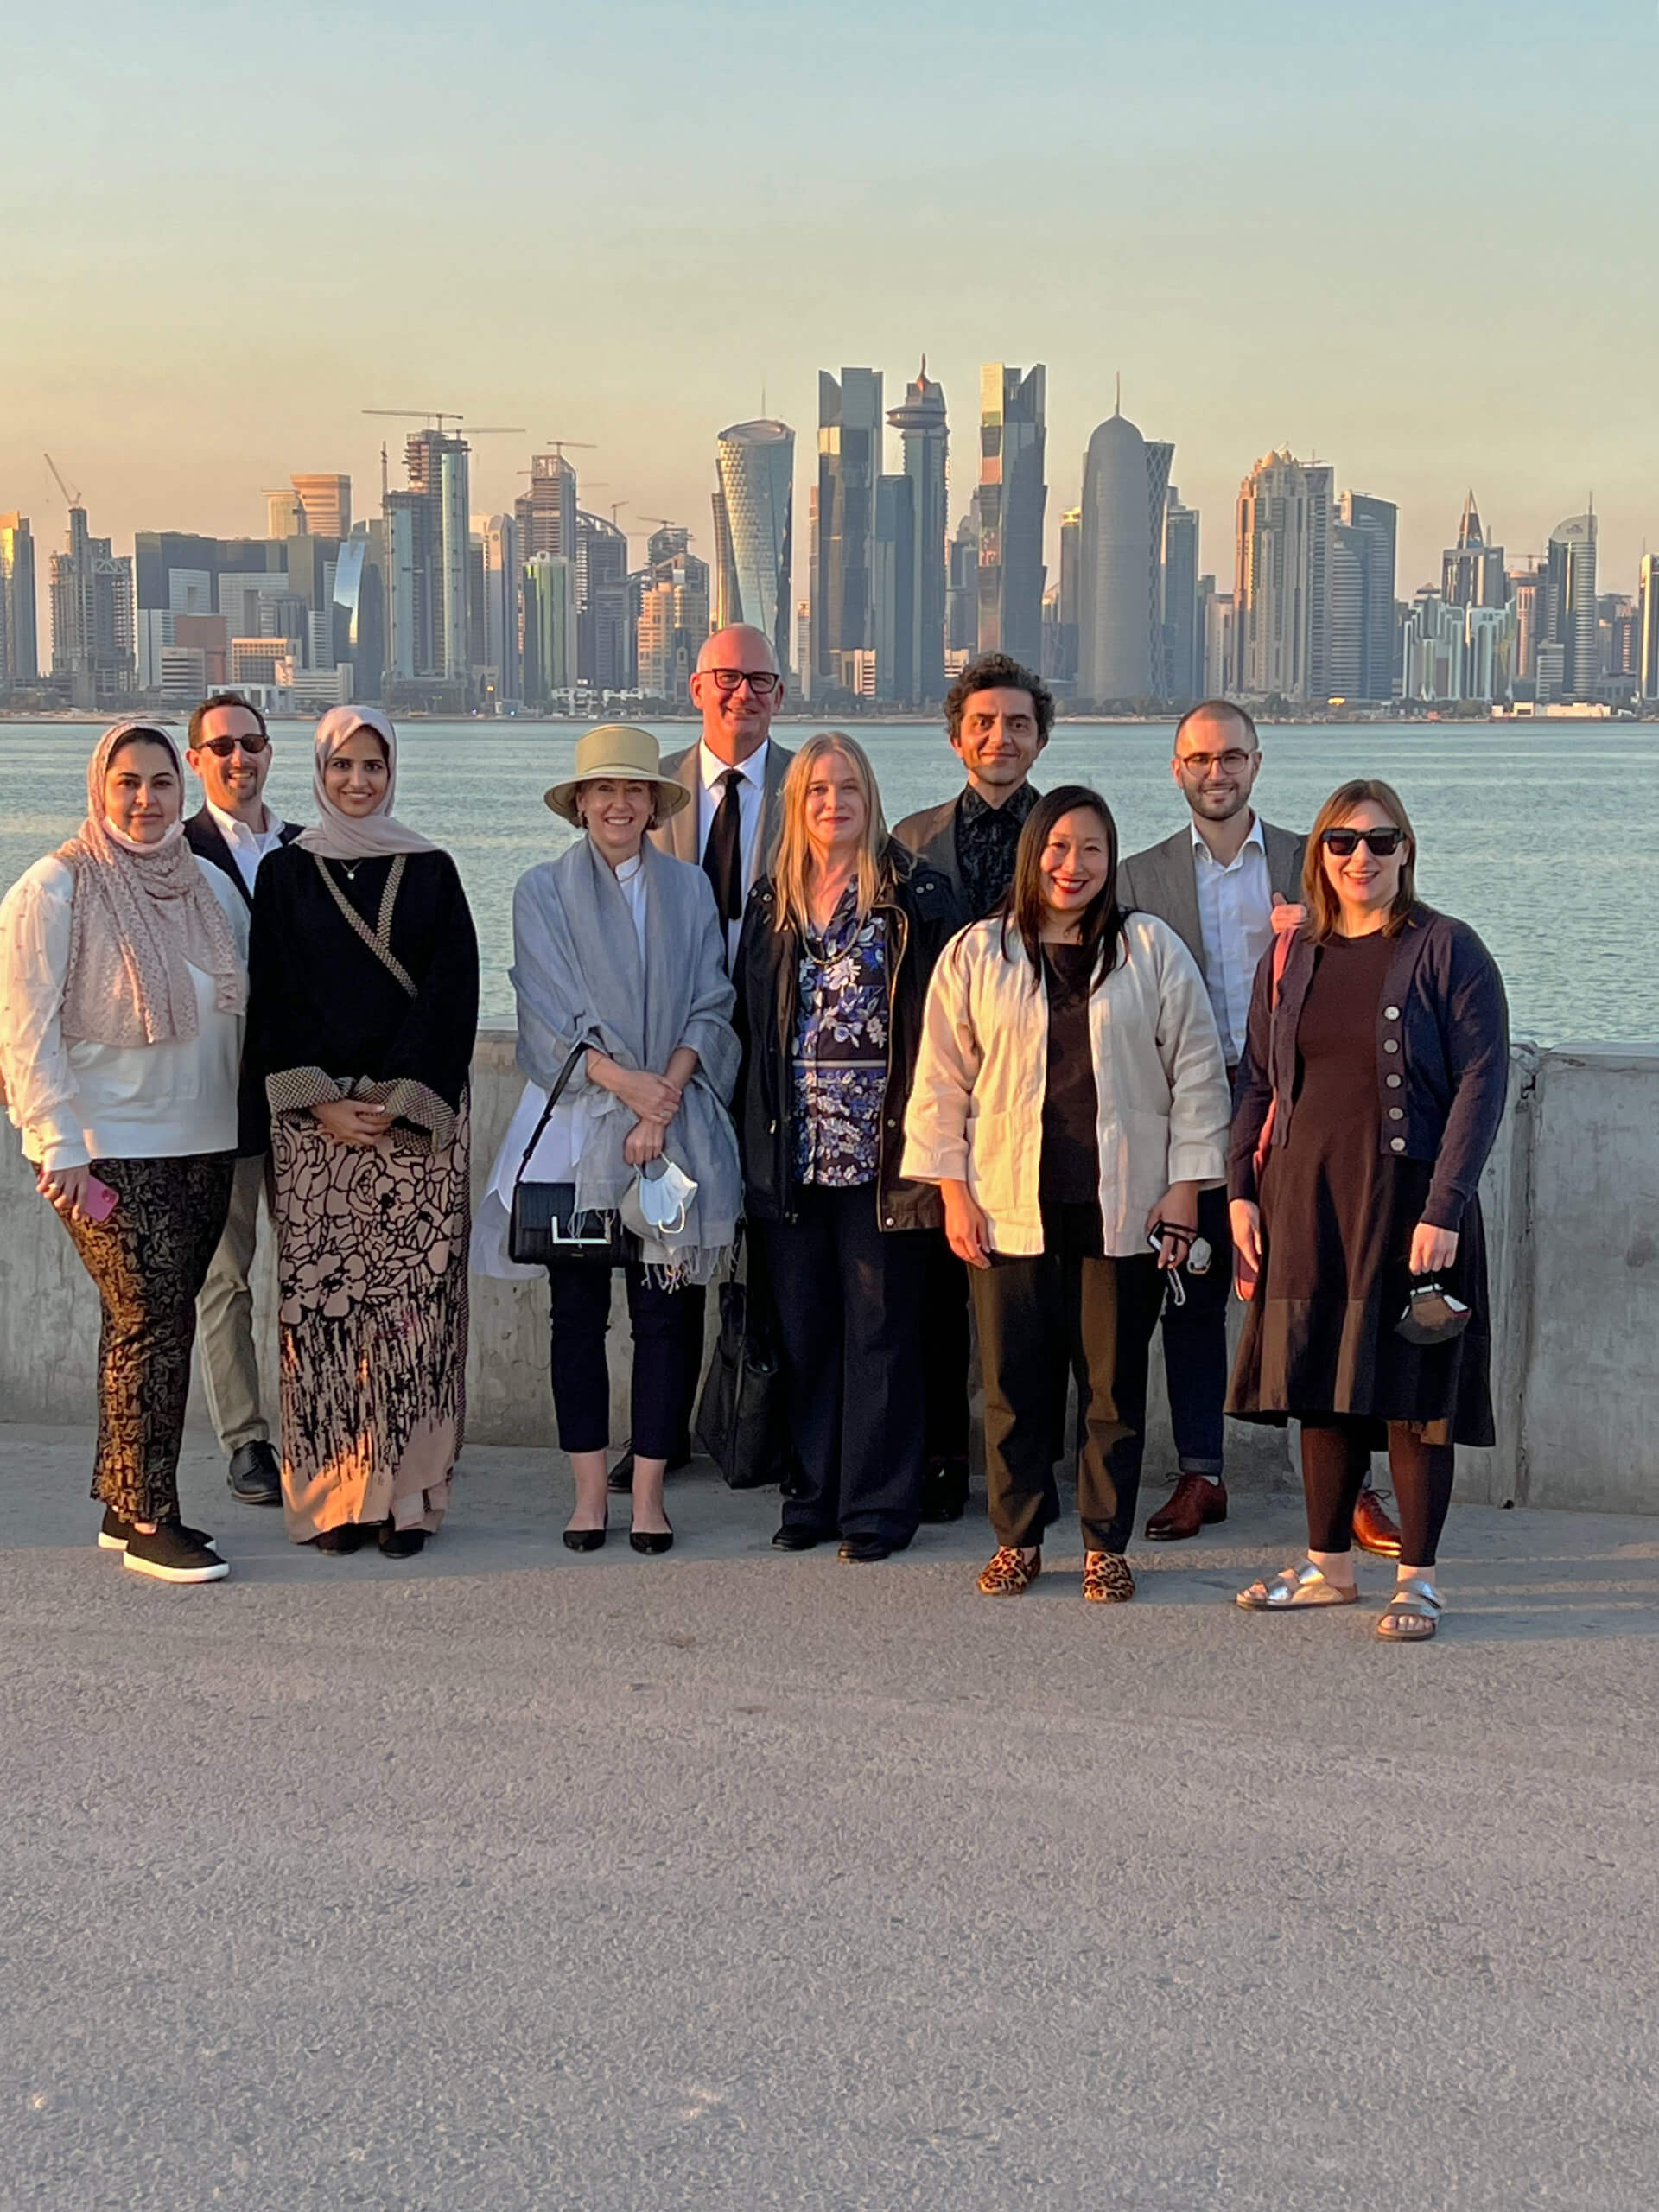 Thank you to our sponsors who made the 2022 Culture Delegation to Qatar possible, and thank you to all of our partners and friends who made it a success. We look forward to introducing the next cohort of innovators and creators to the enriching experiences of Qatar, and to forging new lasting bonds between the U.S. and Qatar through the power of art and cultural exchange.